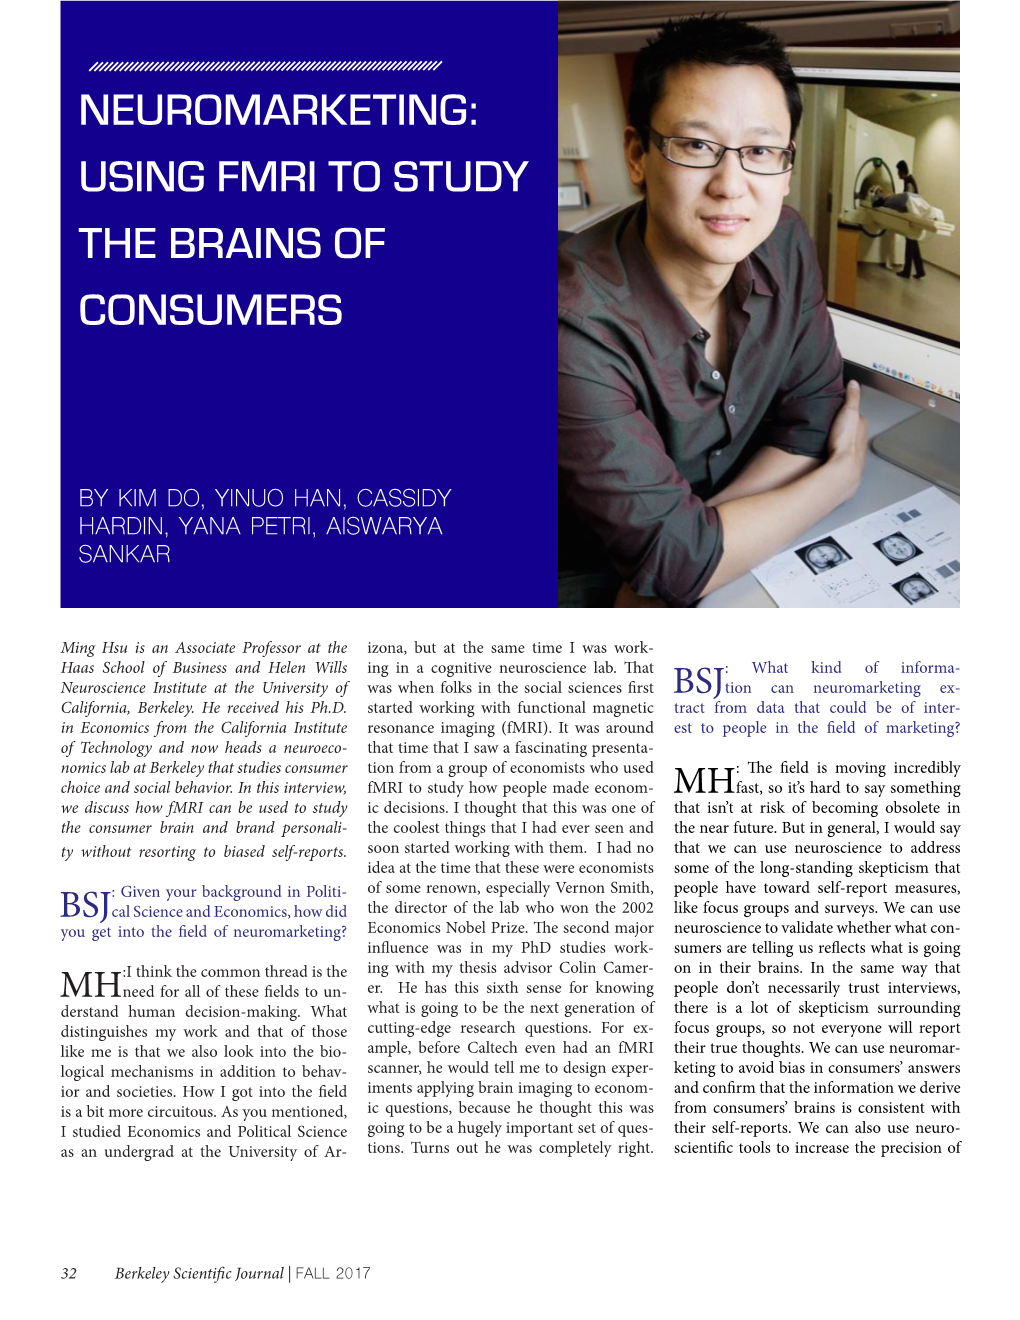 Neuromarketing: Using Fmri to Study the Brains of Consumers